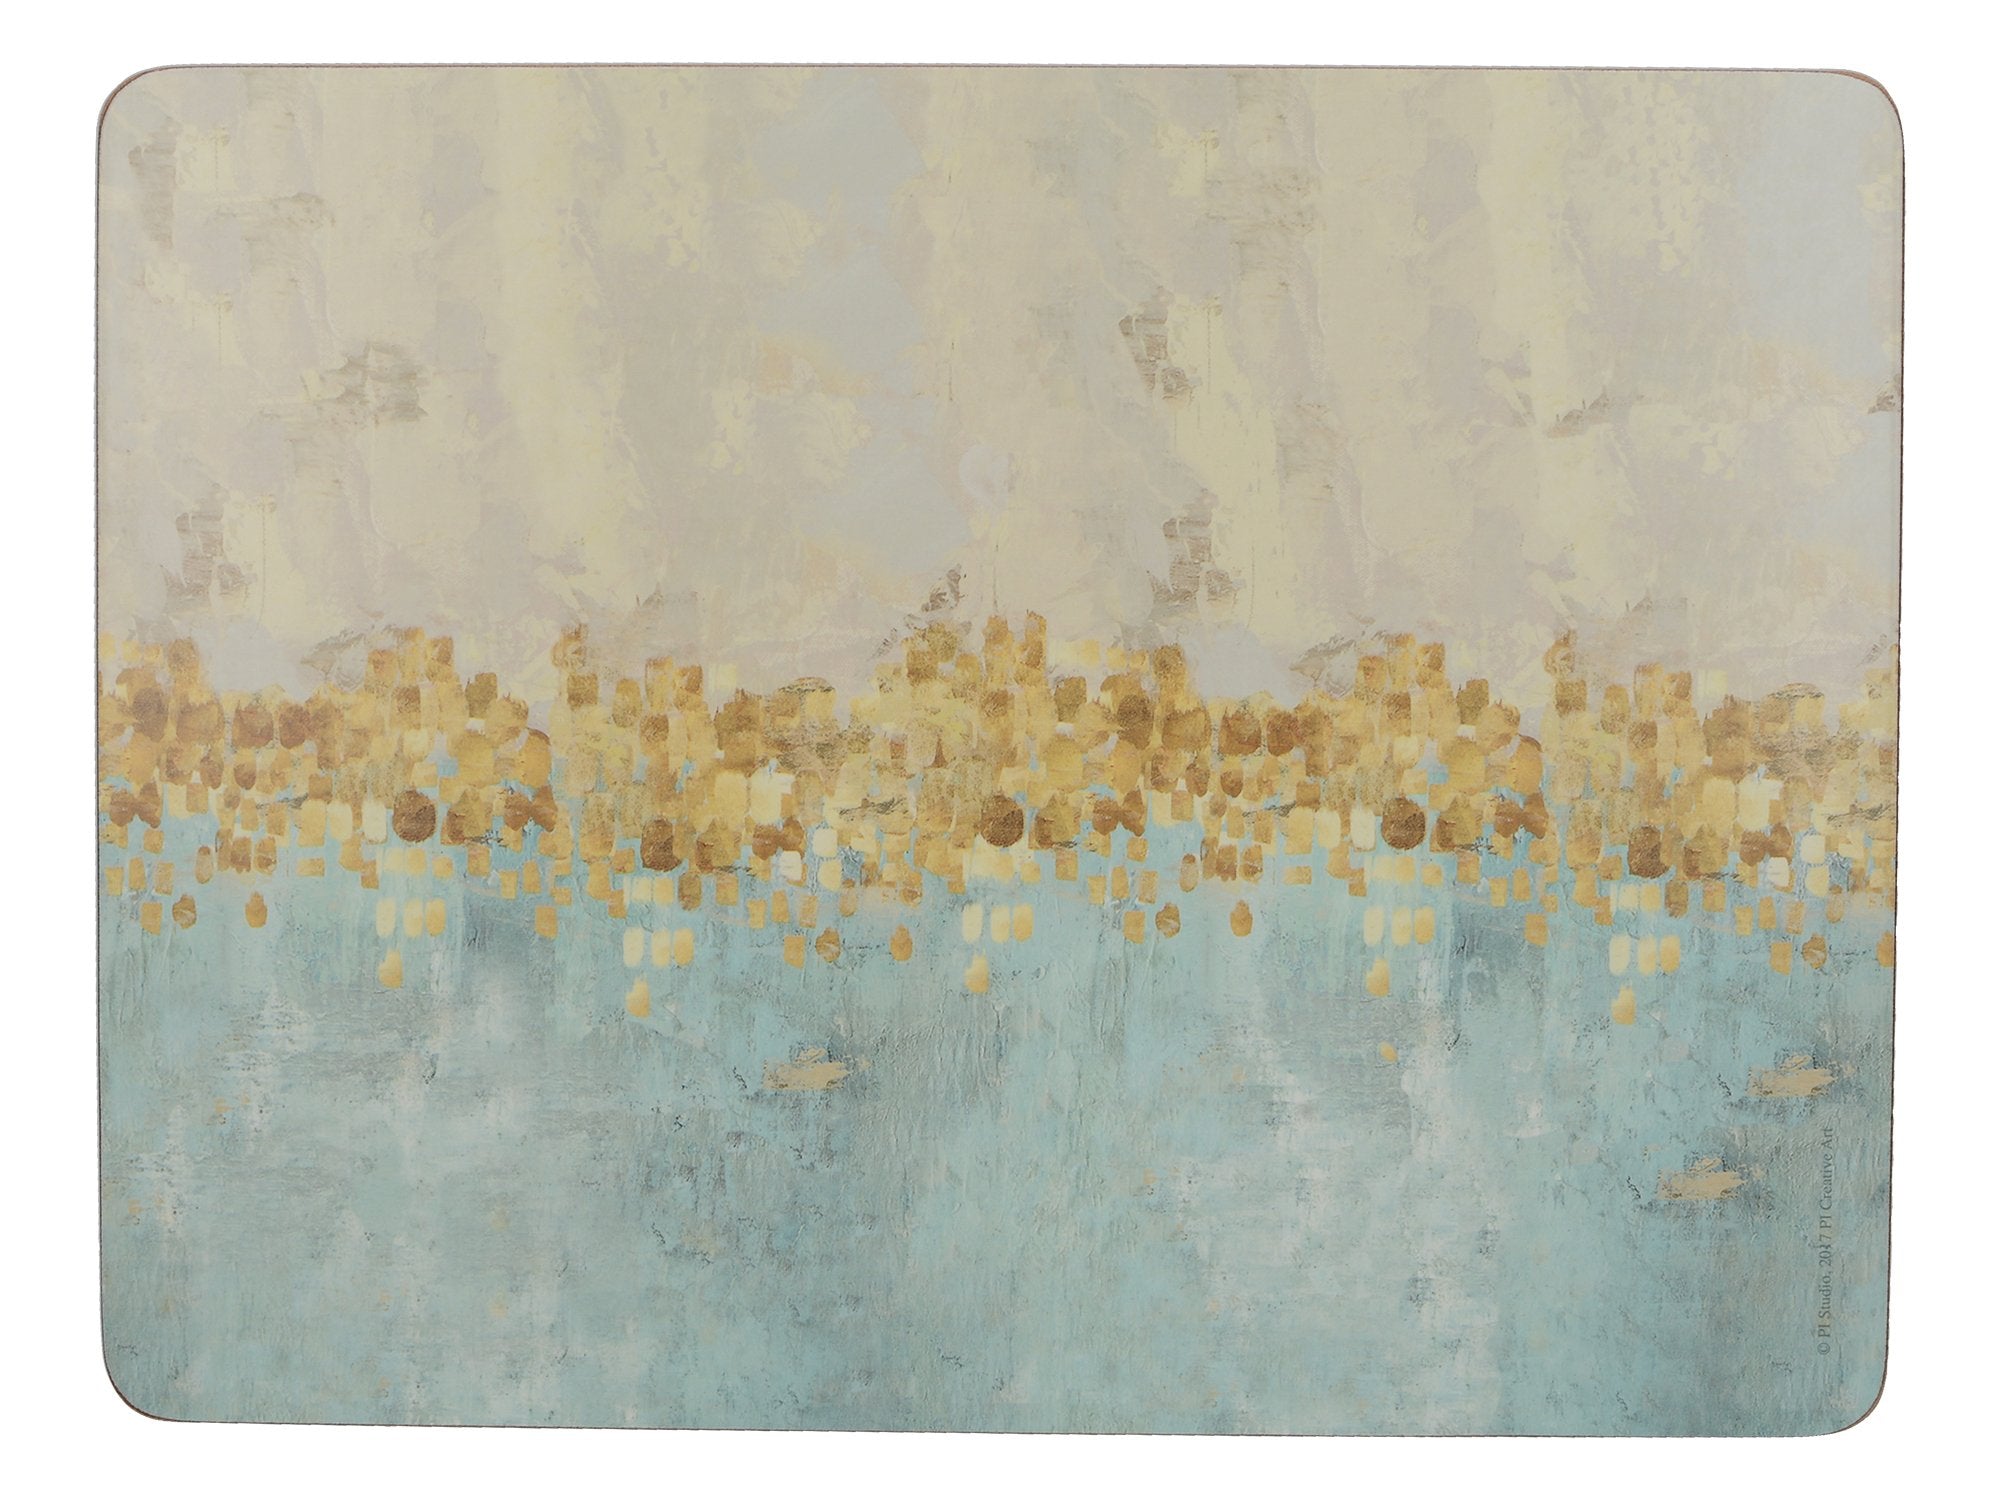 Creative Tops 'Golden Reflections' Printed Rectangular Cork-Backed Placemats, 30 x 22.75 cm - Gold (Set of 6)